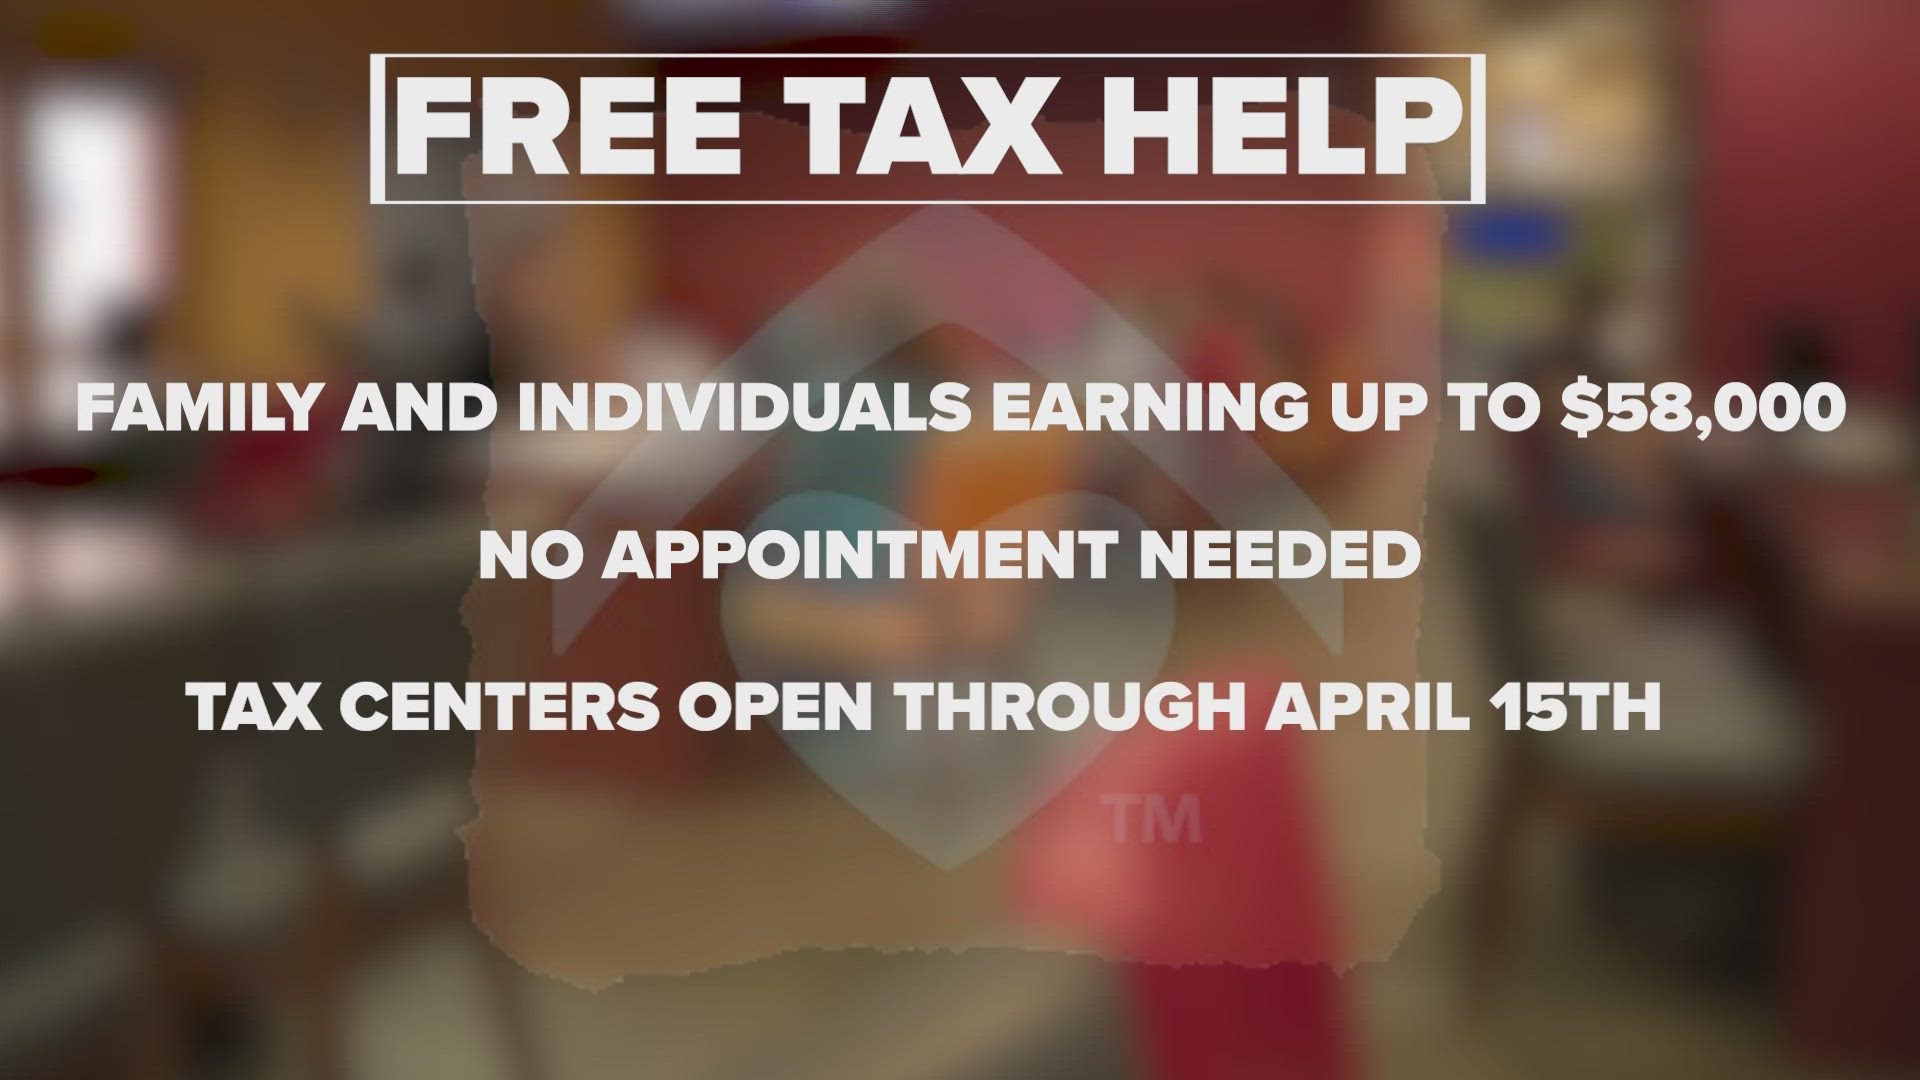 The organization runs  27 tax centers across Houston to assist filers who earn $58,000 a year or less.